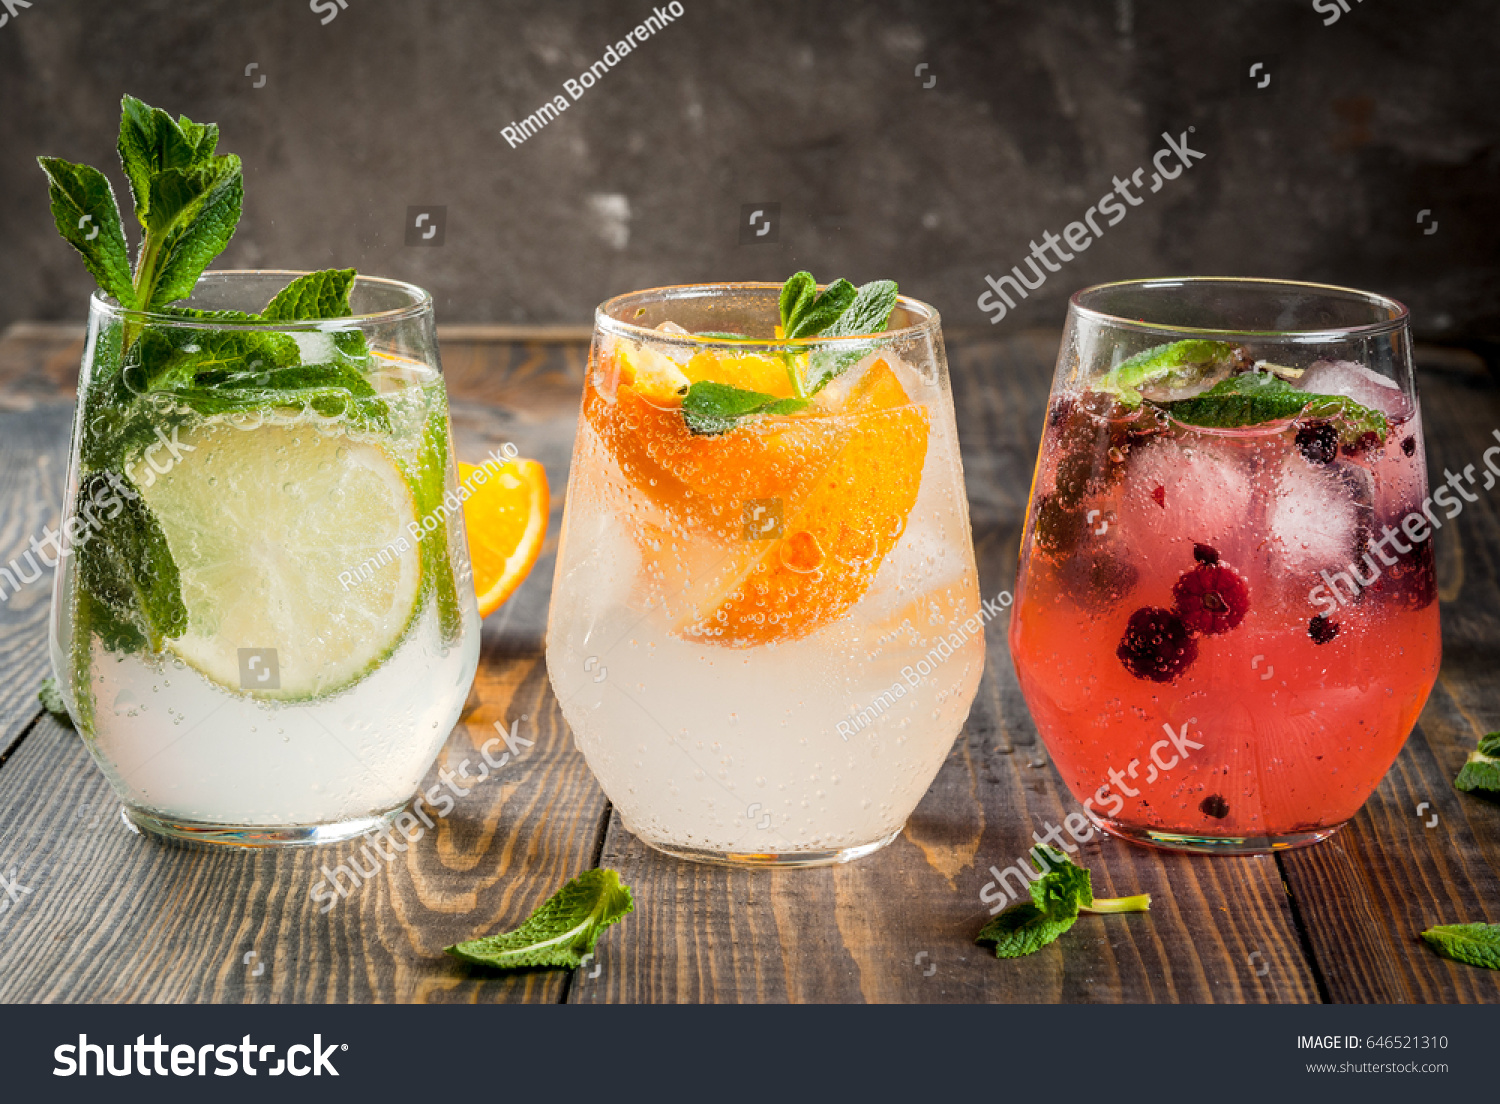 Selection of three kinds of gin tonic: with blackberries, with orange, with lime and mint leaves. In glasses on a rustic wooden background. Copy space #646521310